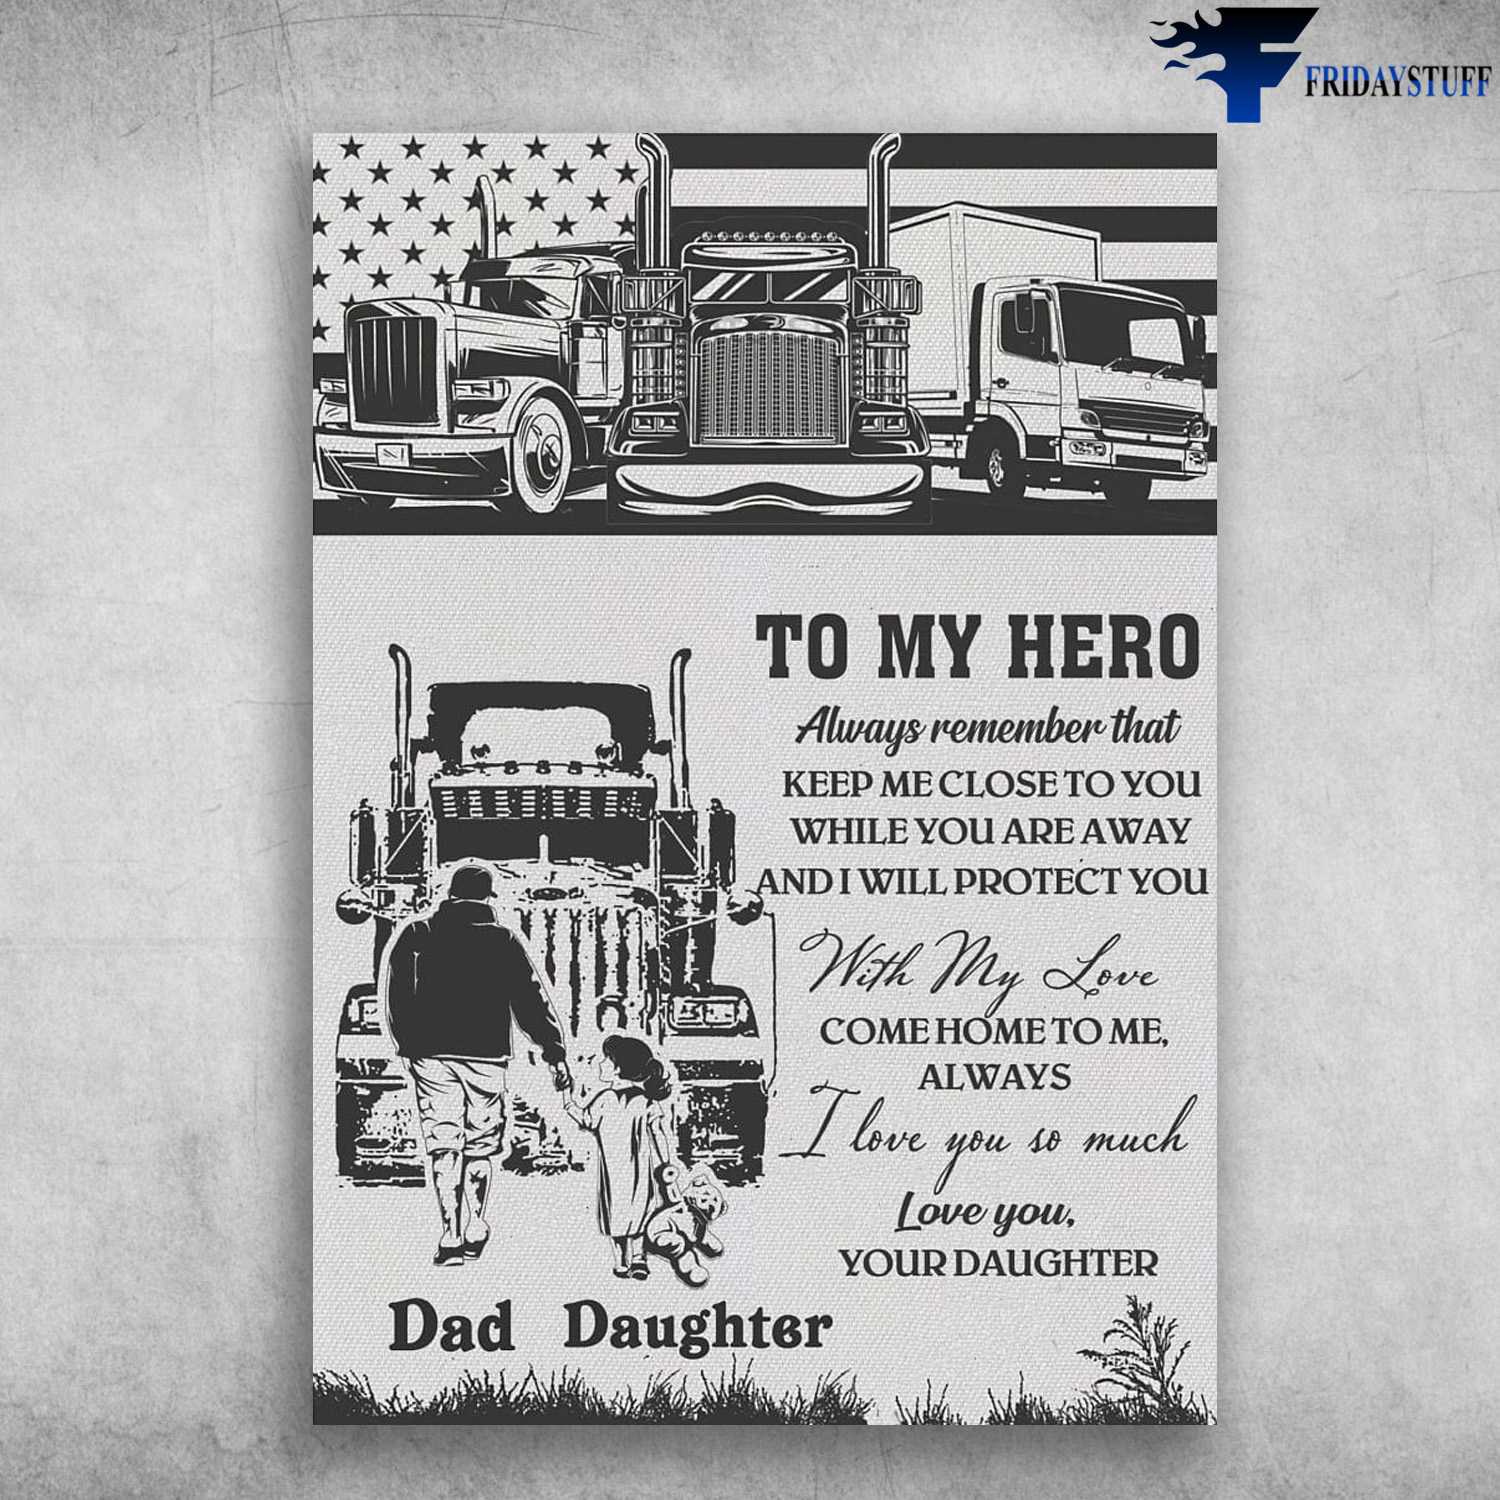 Dad And Daughter, Trucker Poster, To My Hero, Always Remember That, Keep Me Close To You, While You Are Away, And I Will Protect You, With My Love, Come Home To Me